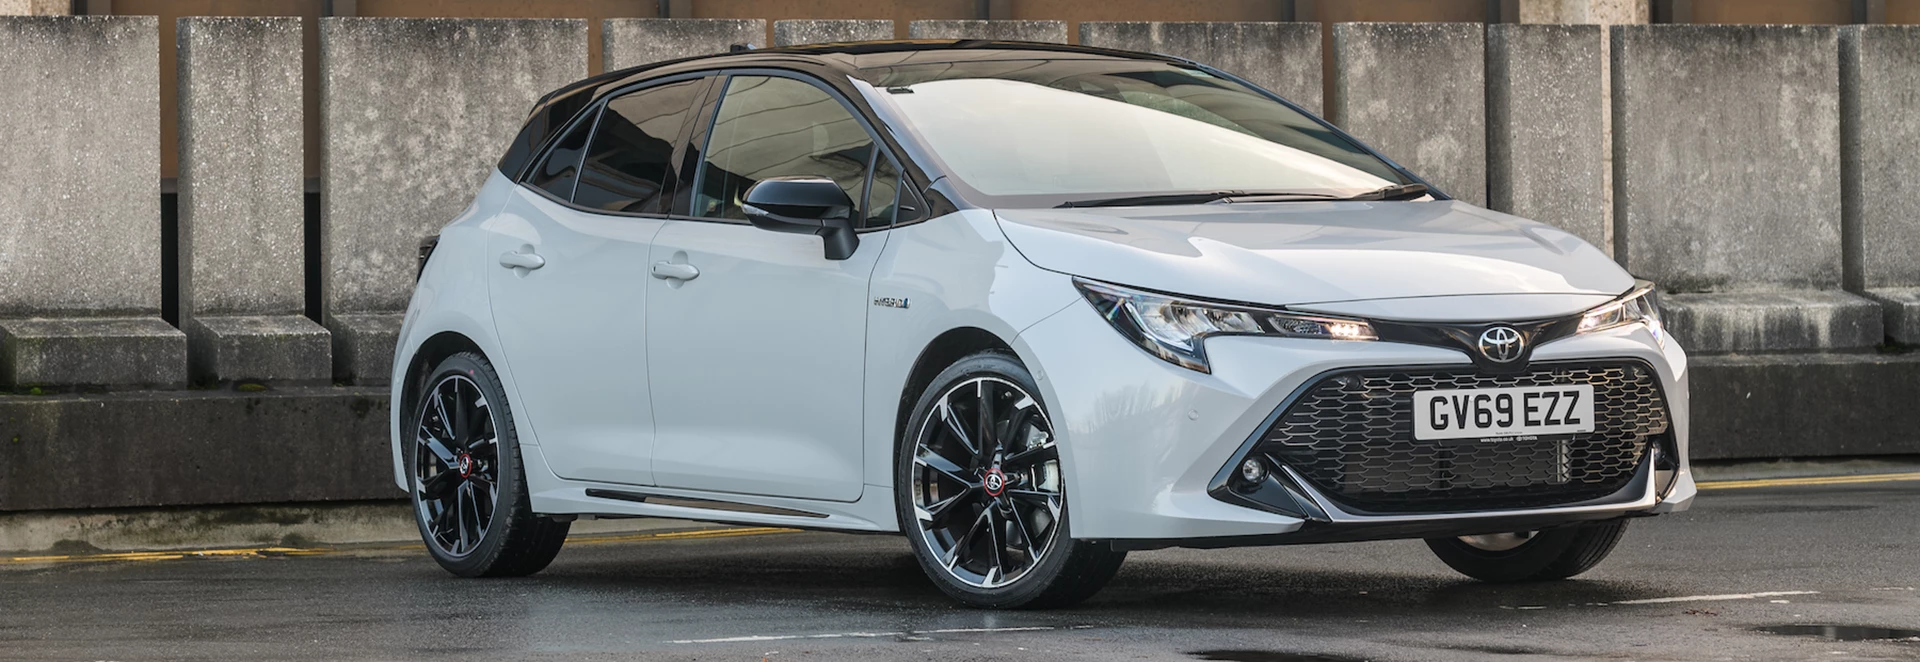 Buyer’s guide to the Toyota Corolla 